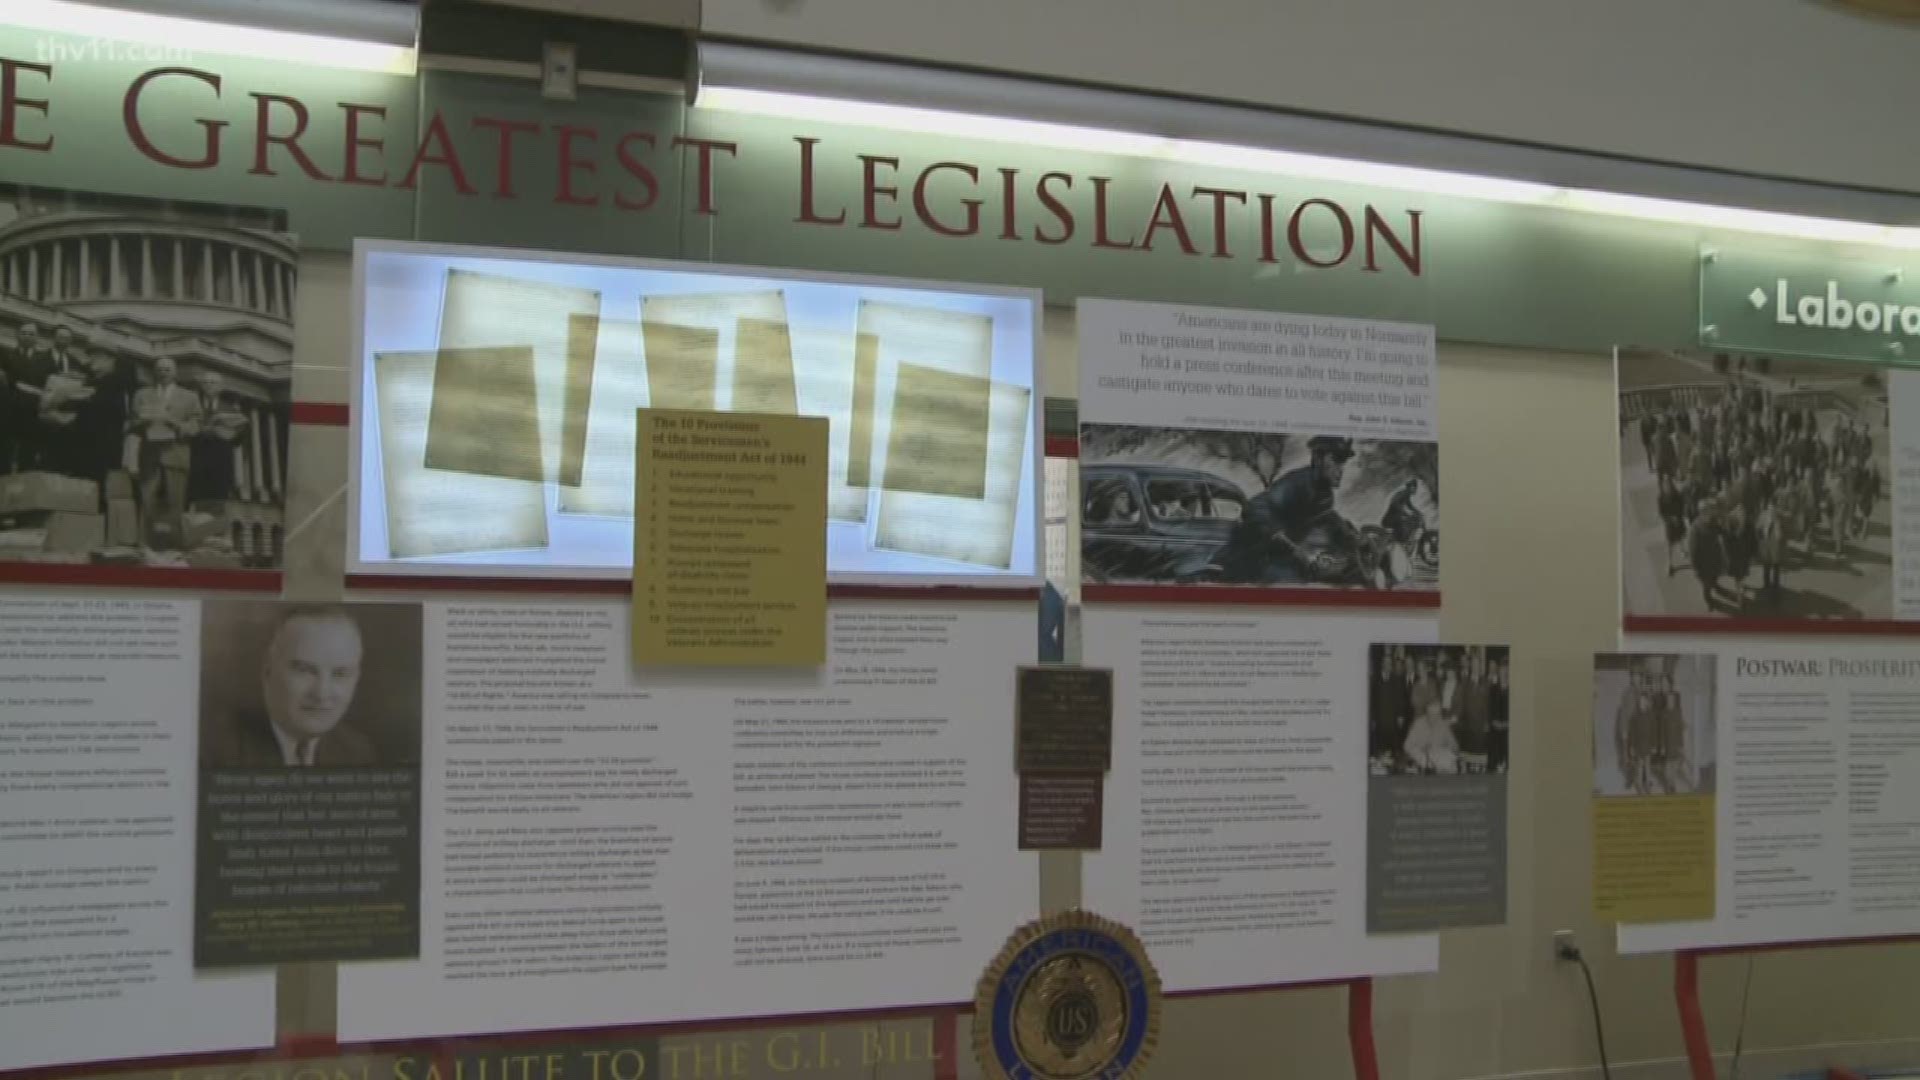 For 30 days starting January 14th, the American Legion's exhibit "The Greatest Legislation: An American Legion Centennial Salute to the GI Bill" will be open to the public at the Green Atrium of the John L. McClellan Memorial Veterans Hospital in Little Rock